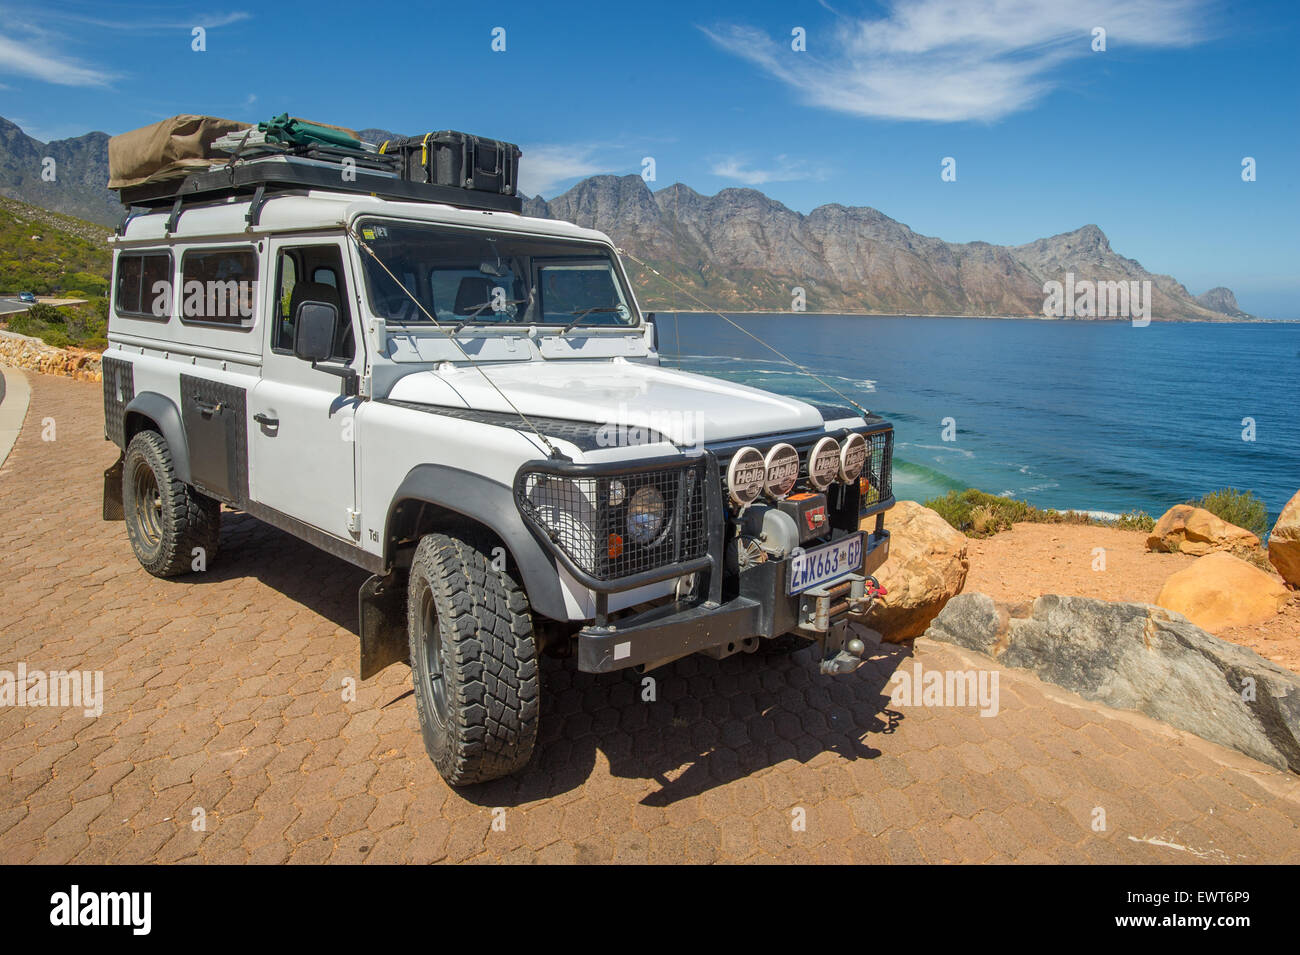 Gordon's Bay, South Africa - Land Rover Defender by the coast Stock Photo